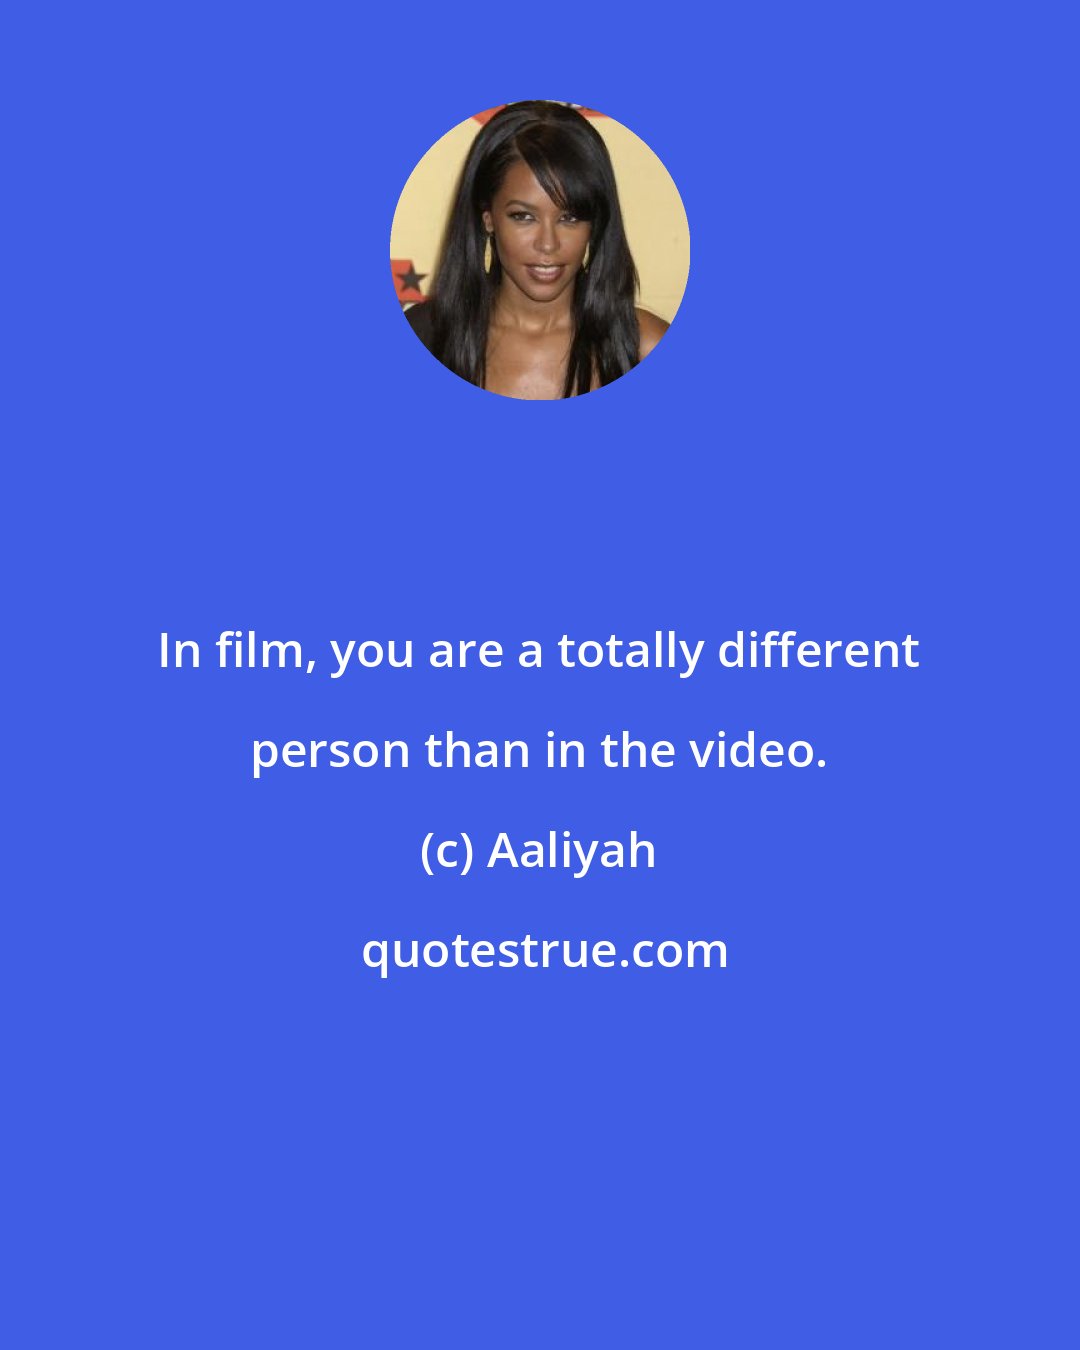 Aaliyah: In film, you are a totally different person than in the video.